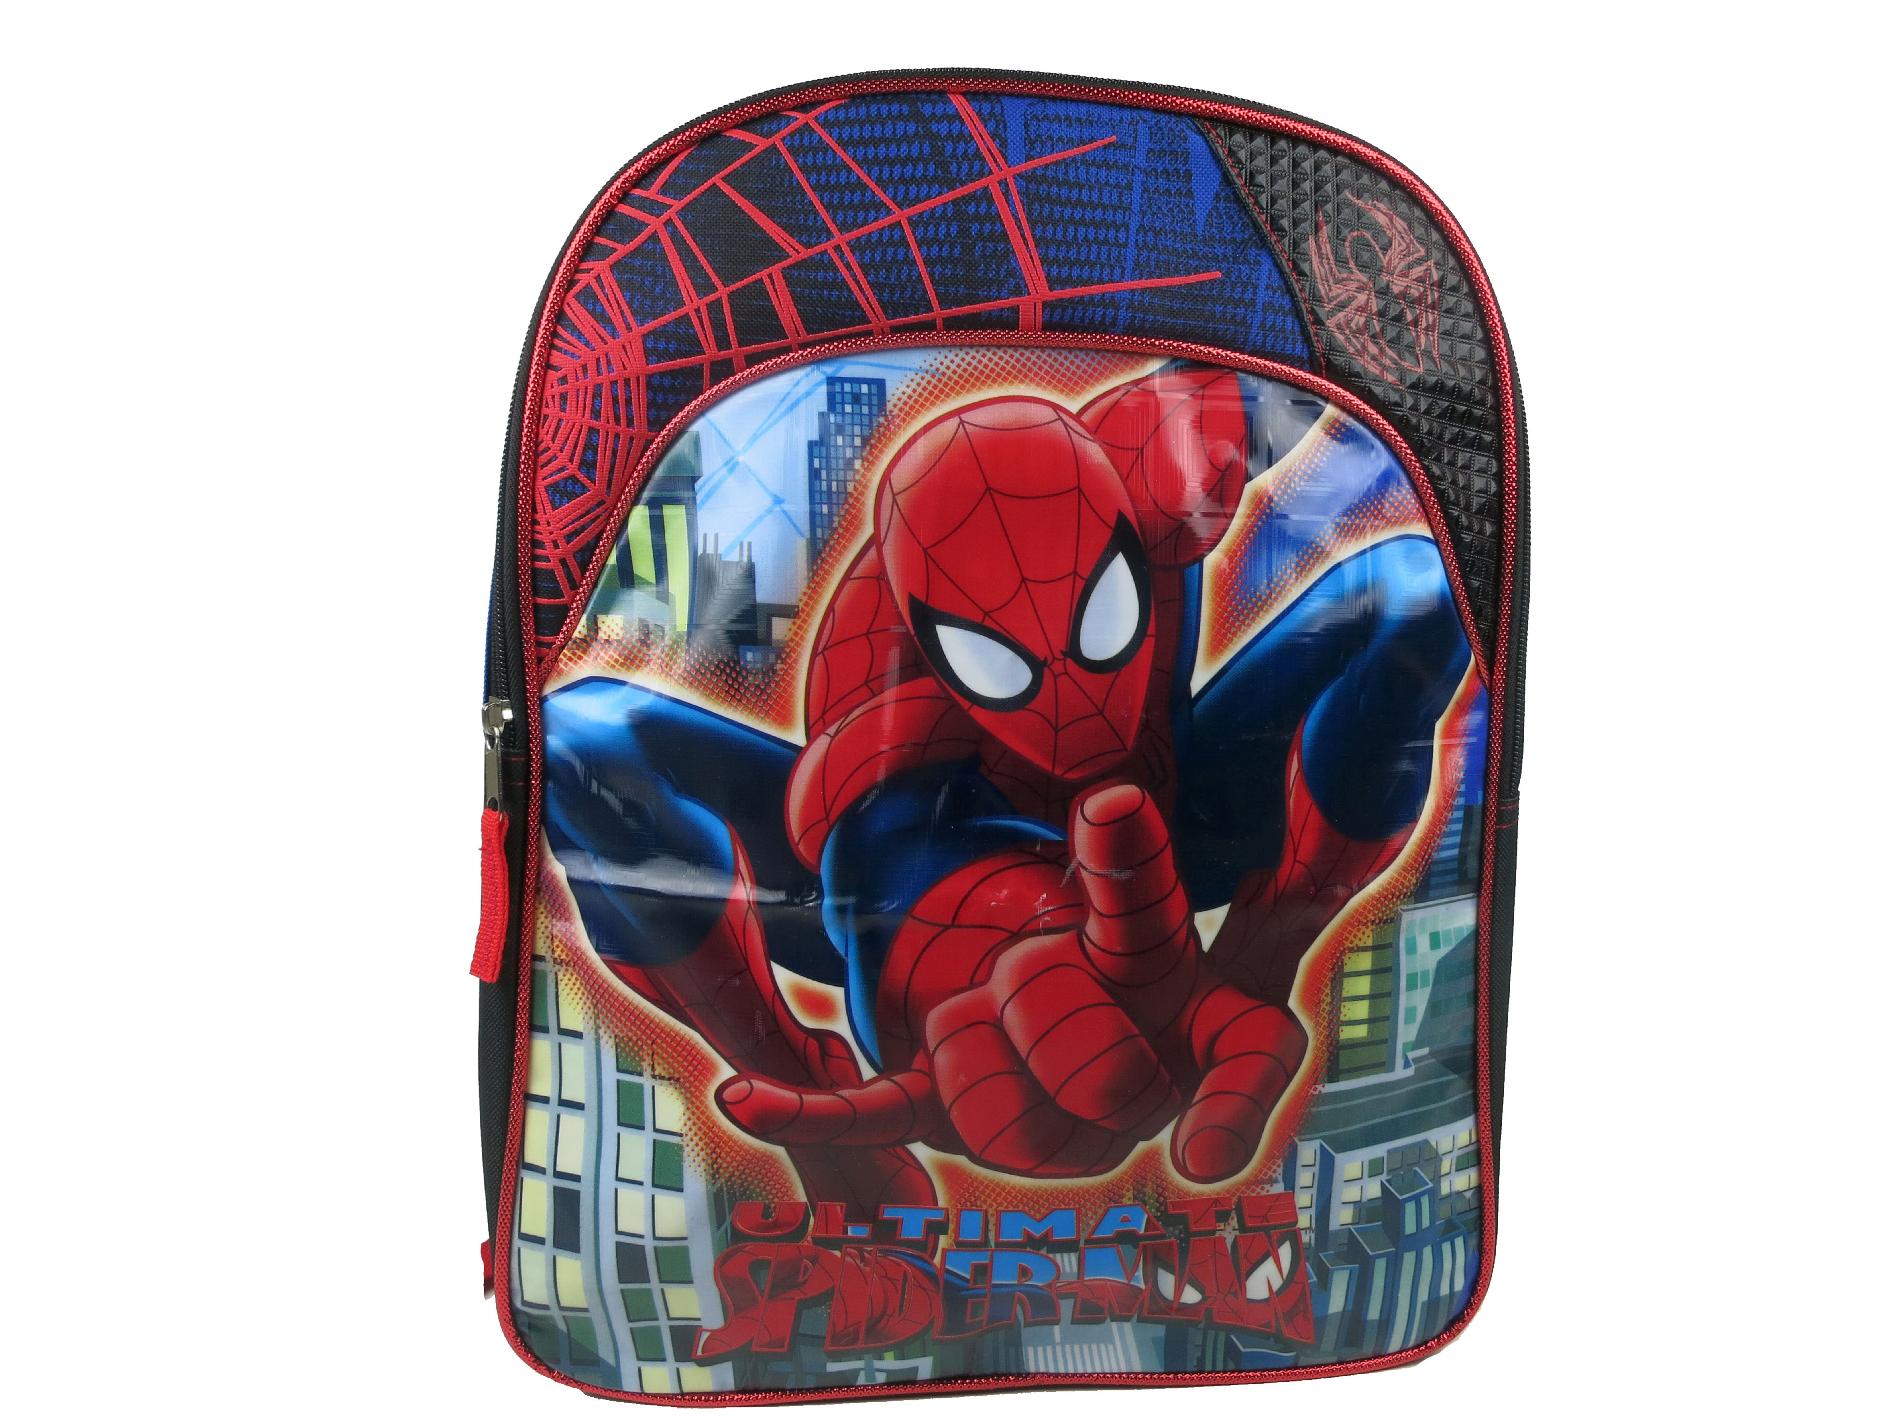 Marvel Spiderman Backpack | Shop Your Way: Online Shopping & Earn Points on Tools, Appliances ...